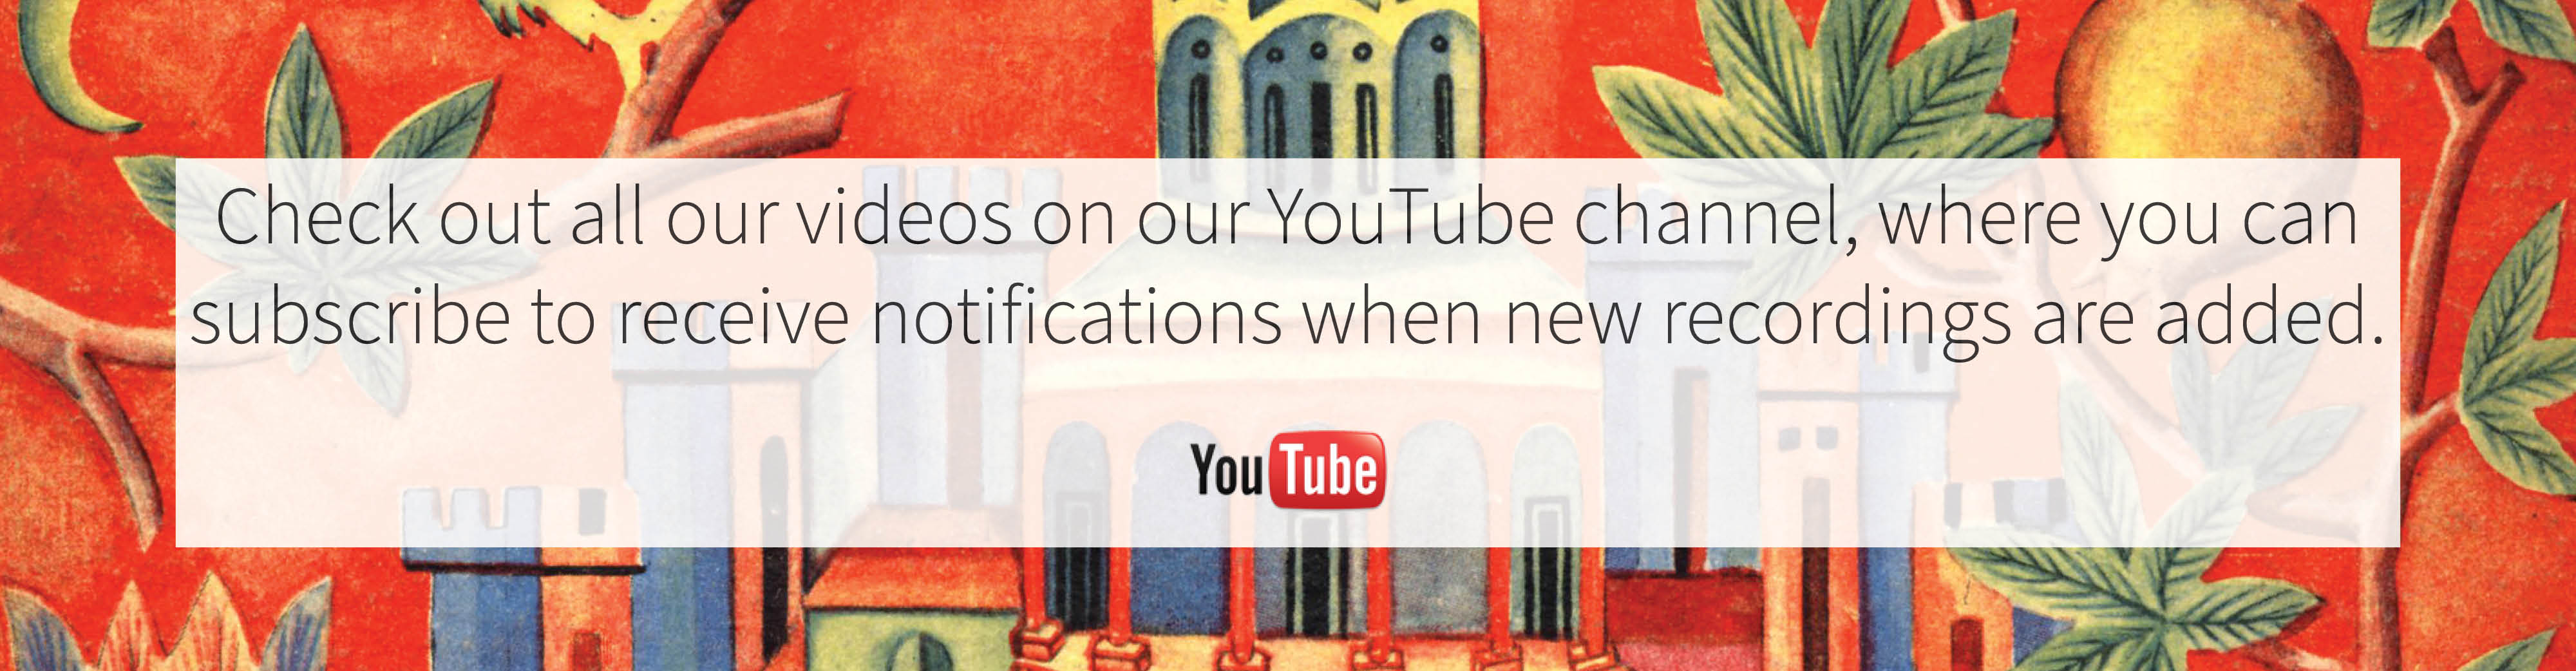 Check out all our videos on our YouTube channel, where you can subscribe to receive notifications when new recordings are added